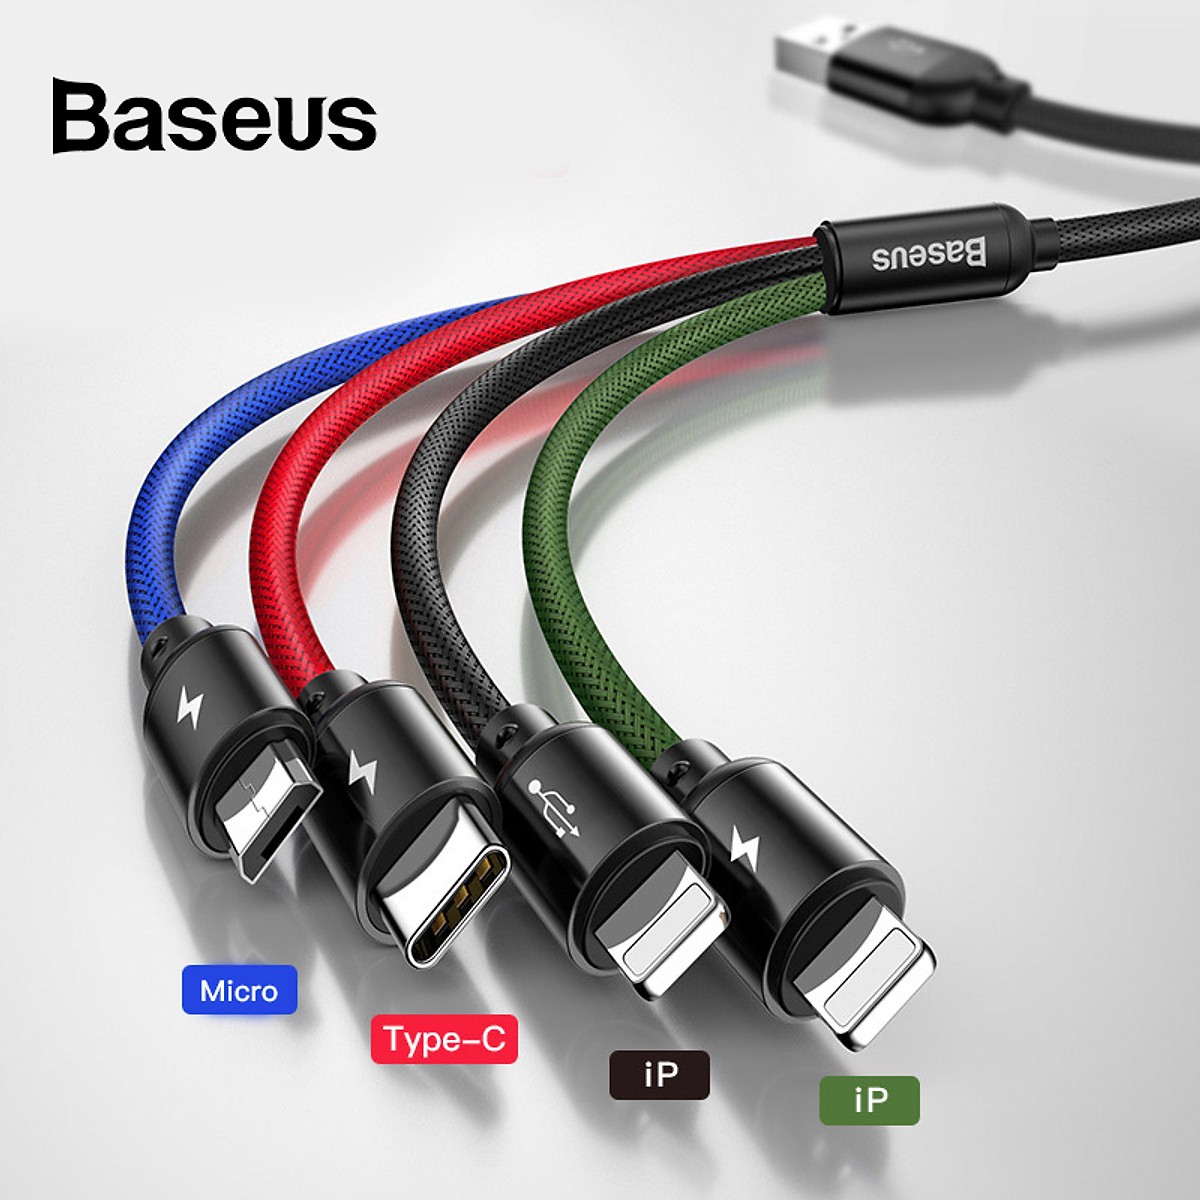 Cáp sạc đa năng Baseus Rapid Series 4 in1 Type-C, 2 Lighting, Micro USB cho iPhone/ iPad / Airpods, Smartphone & Tablet Android (3.5A, 1.2M, Fast charge 4 in 1 Cable) - hàng nhập khẩu